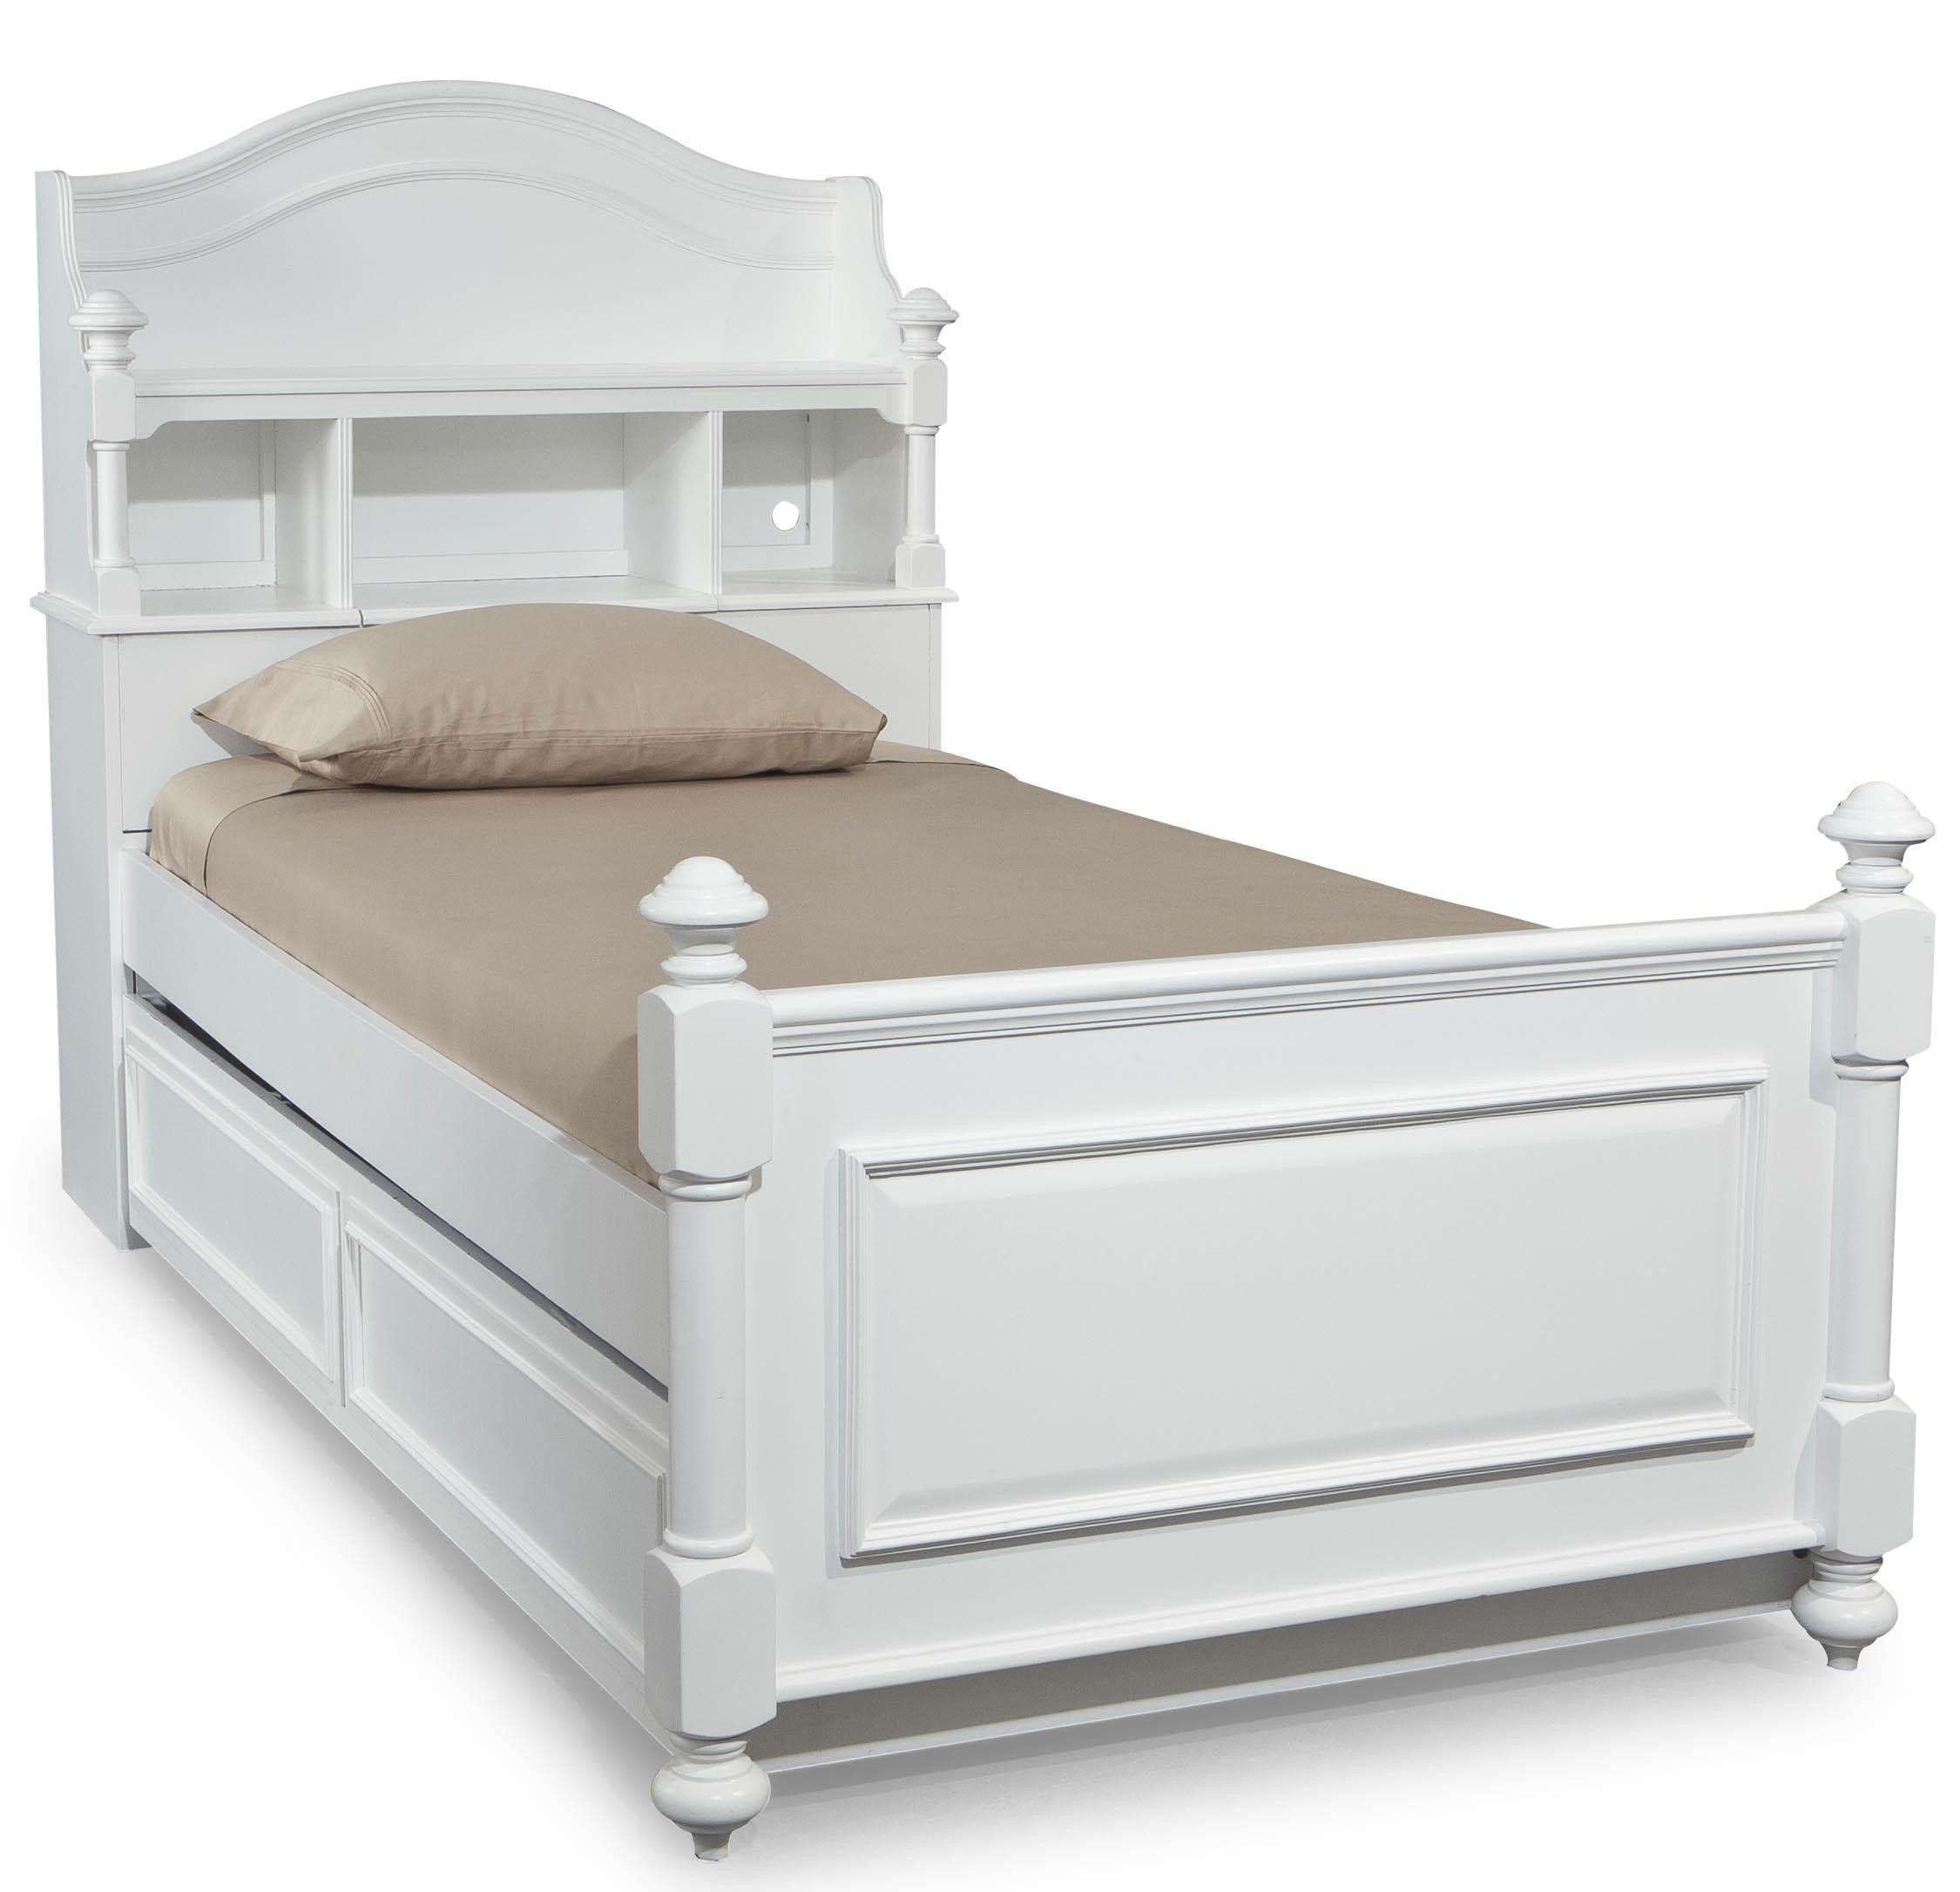 Twin bed with drawers and bookcase headboard